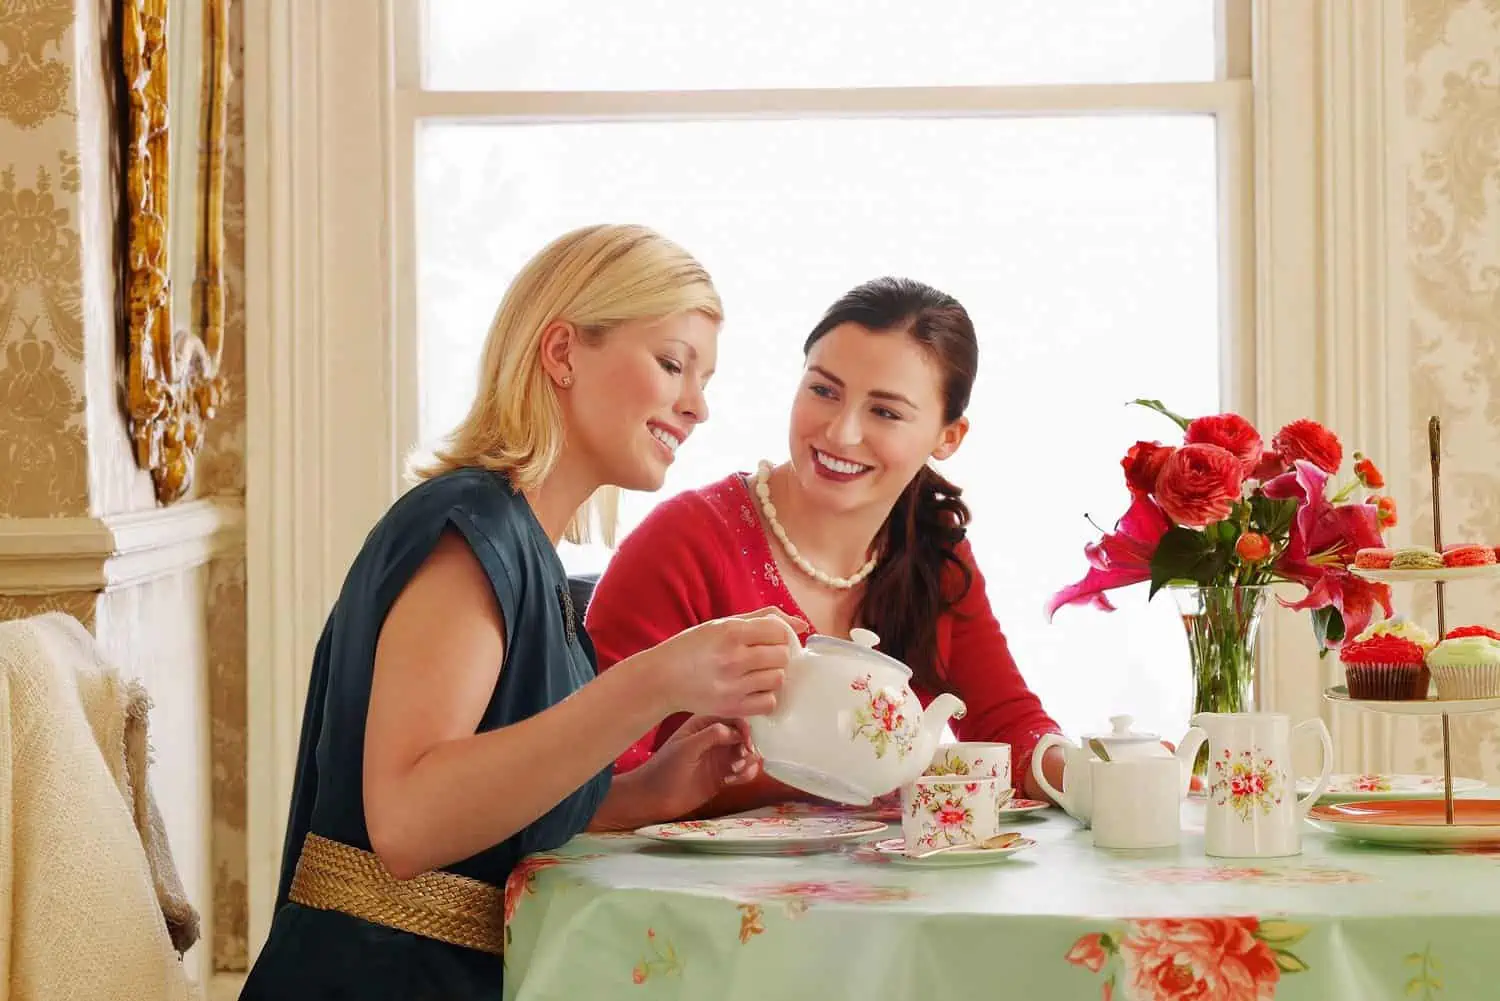 Woman pouring tea in the cup having fun with her friend